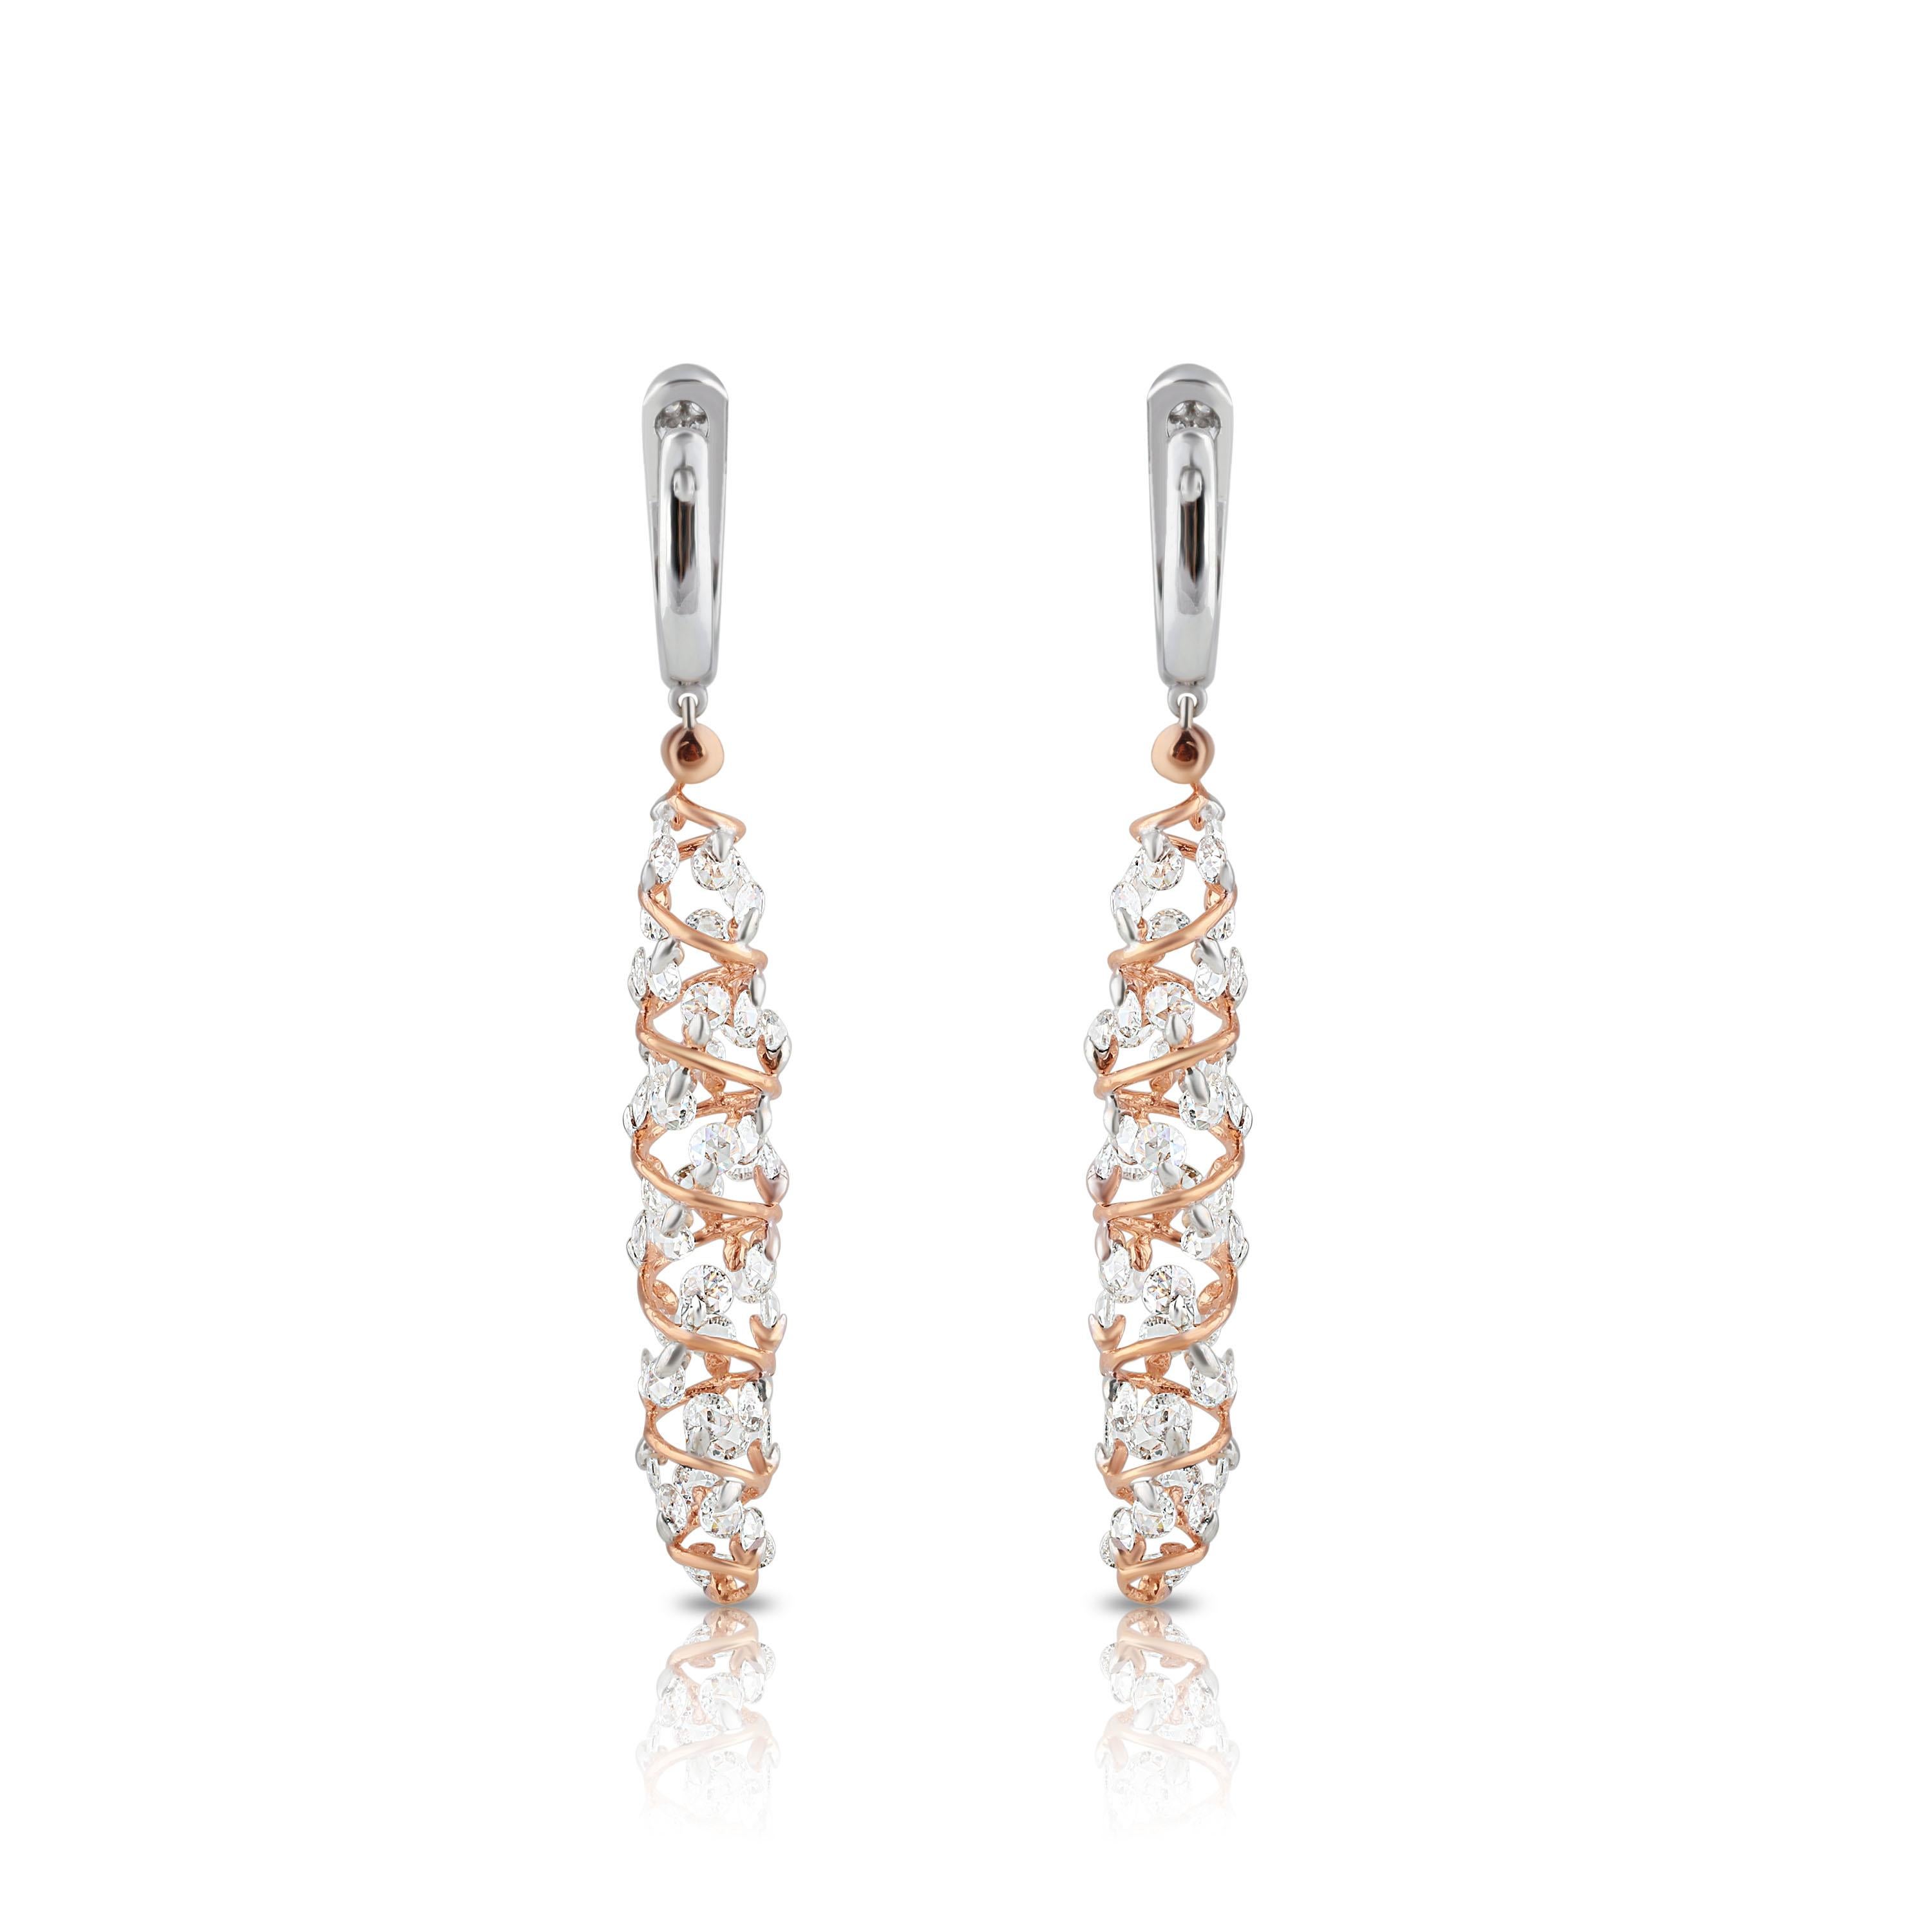 Studio Rêves Rose Cut Diamonds Spiral Earrings in 18 Karat White and Rose Gold In New Condition For Sale In Mumbai, Maharashtra